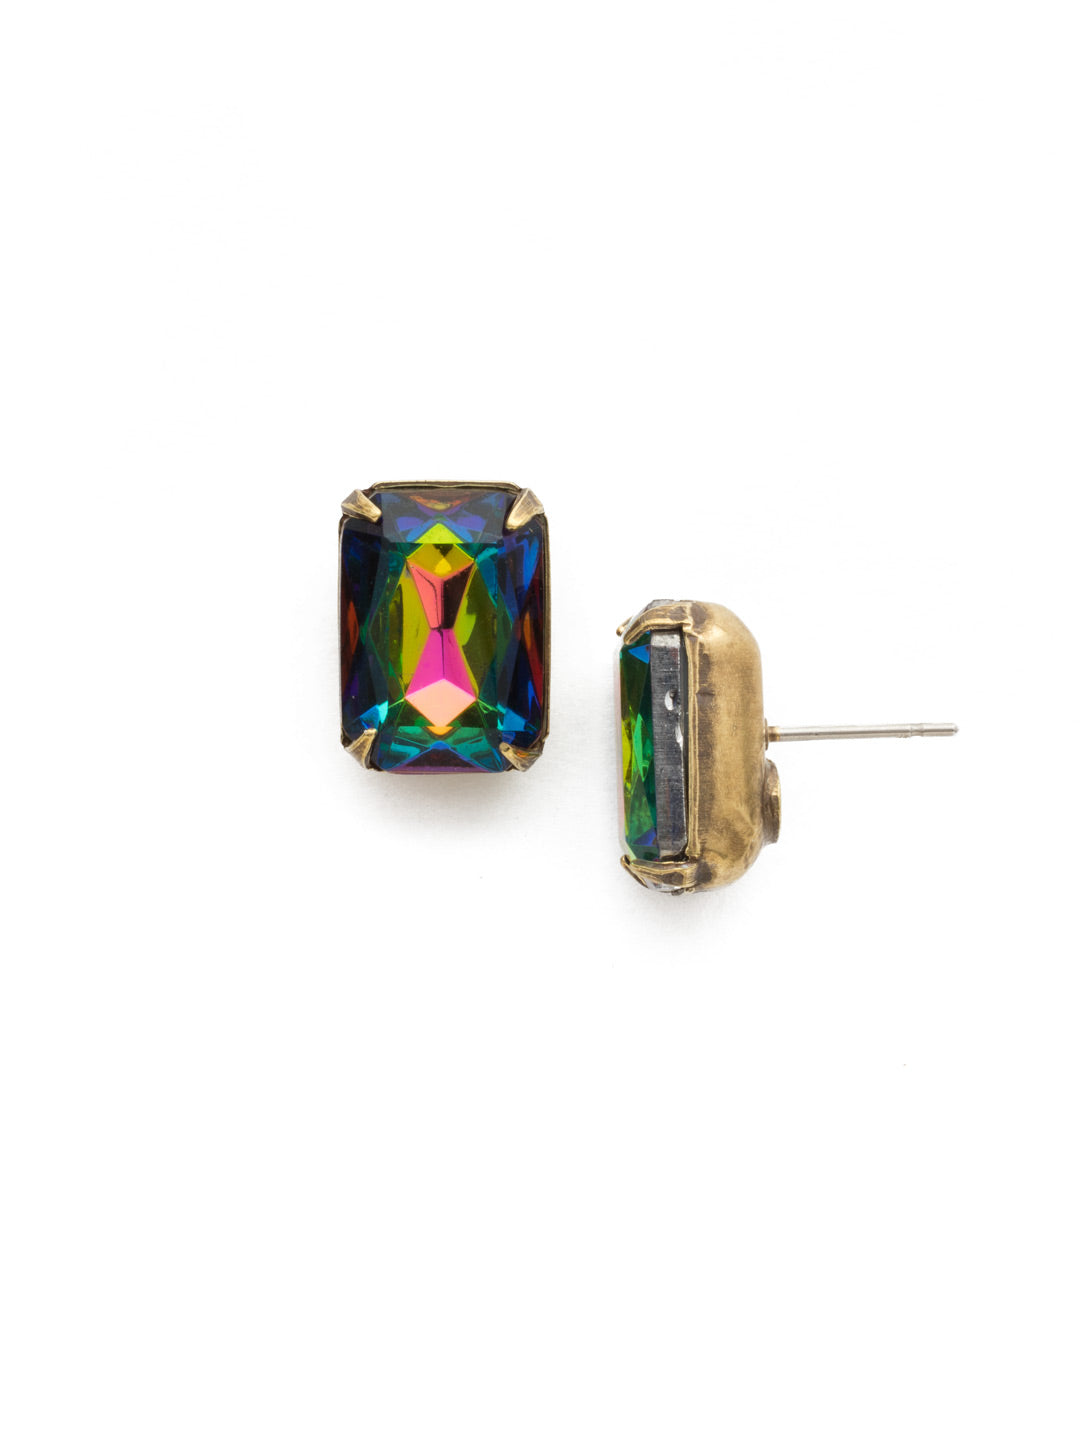 Everyday Stud Earrings - ECT11AGVO - Simple studs never go out of style! Try this single cut crystal on a post for everyday sparkle. From Sorrelli's Volcano collection in our Antique Gold-tone finish.